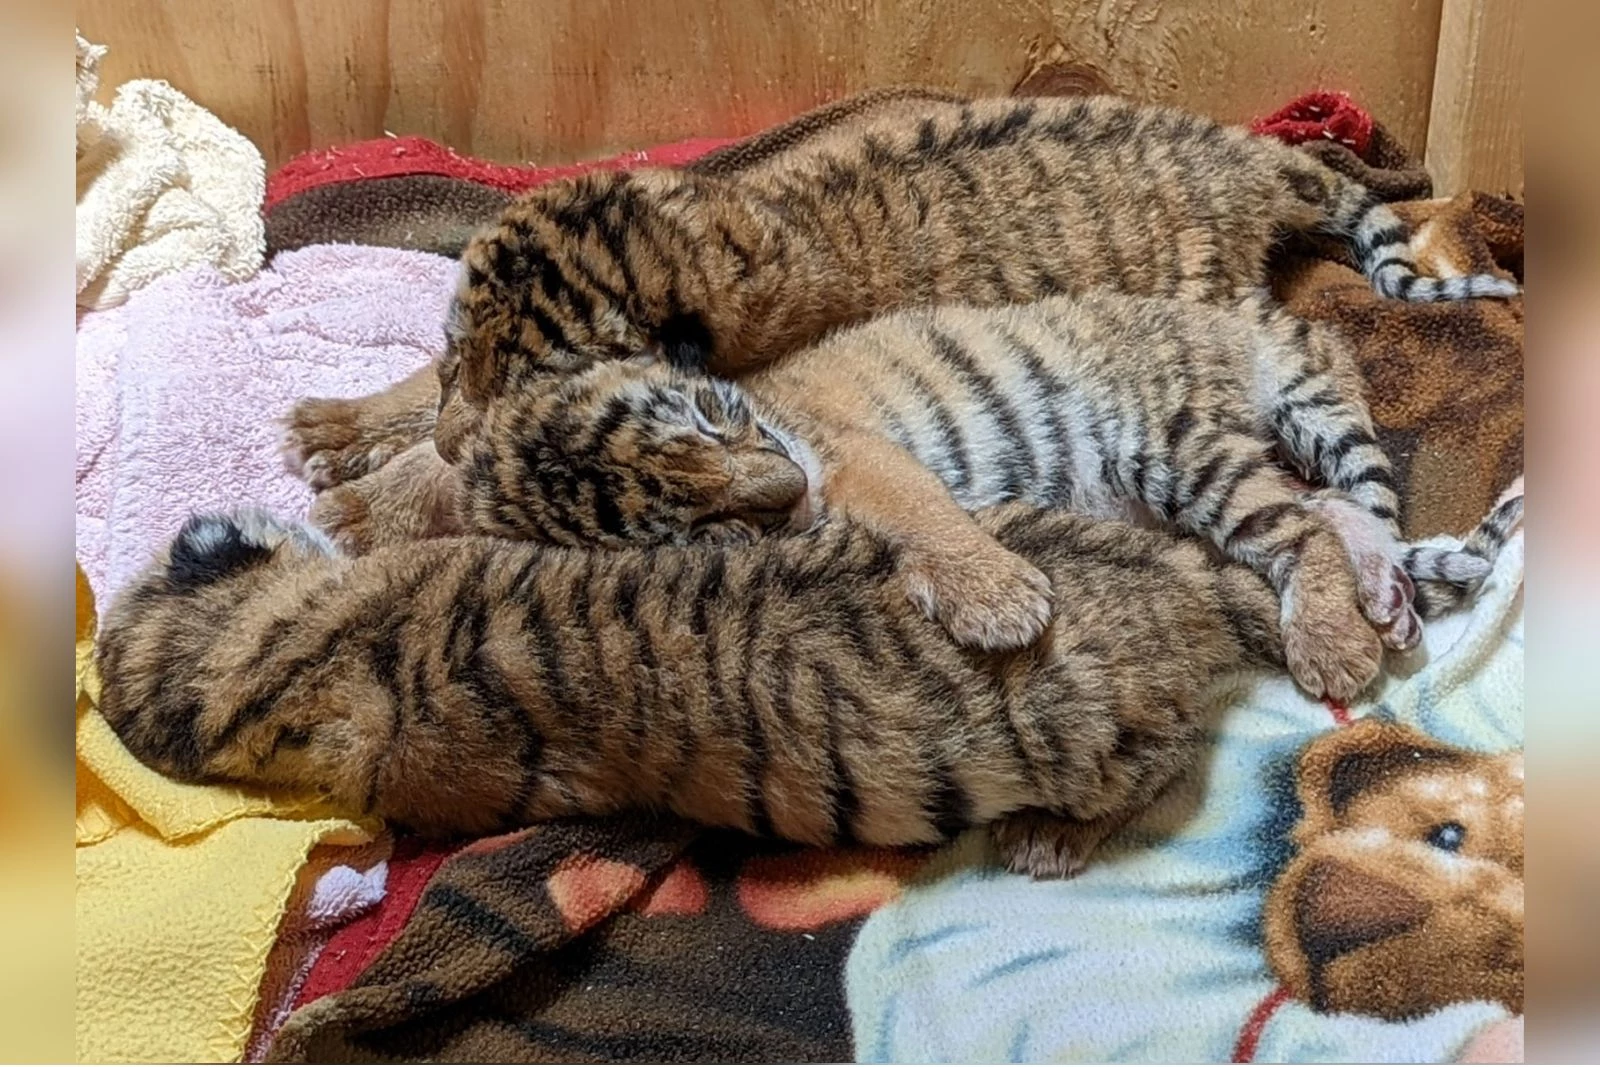 Oh, baby! Indianapolis Zoo welcomes tiger triplets – KIRO 7 News Seattle